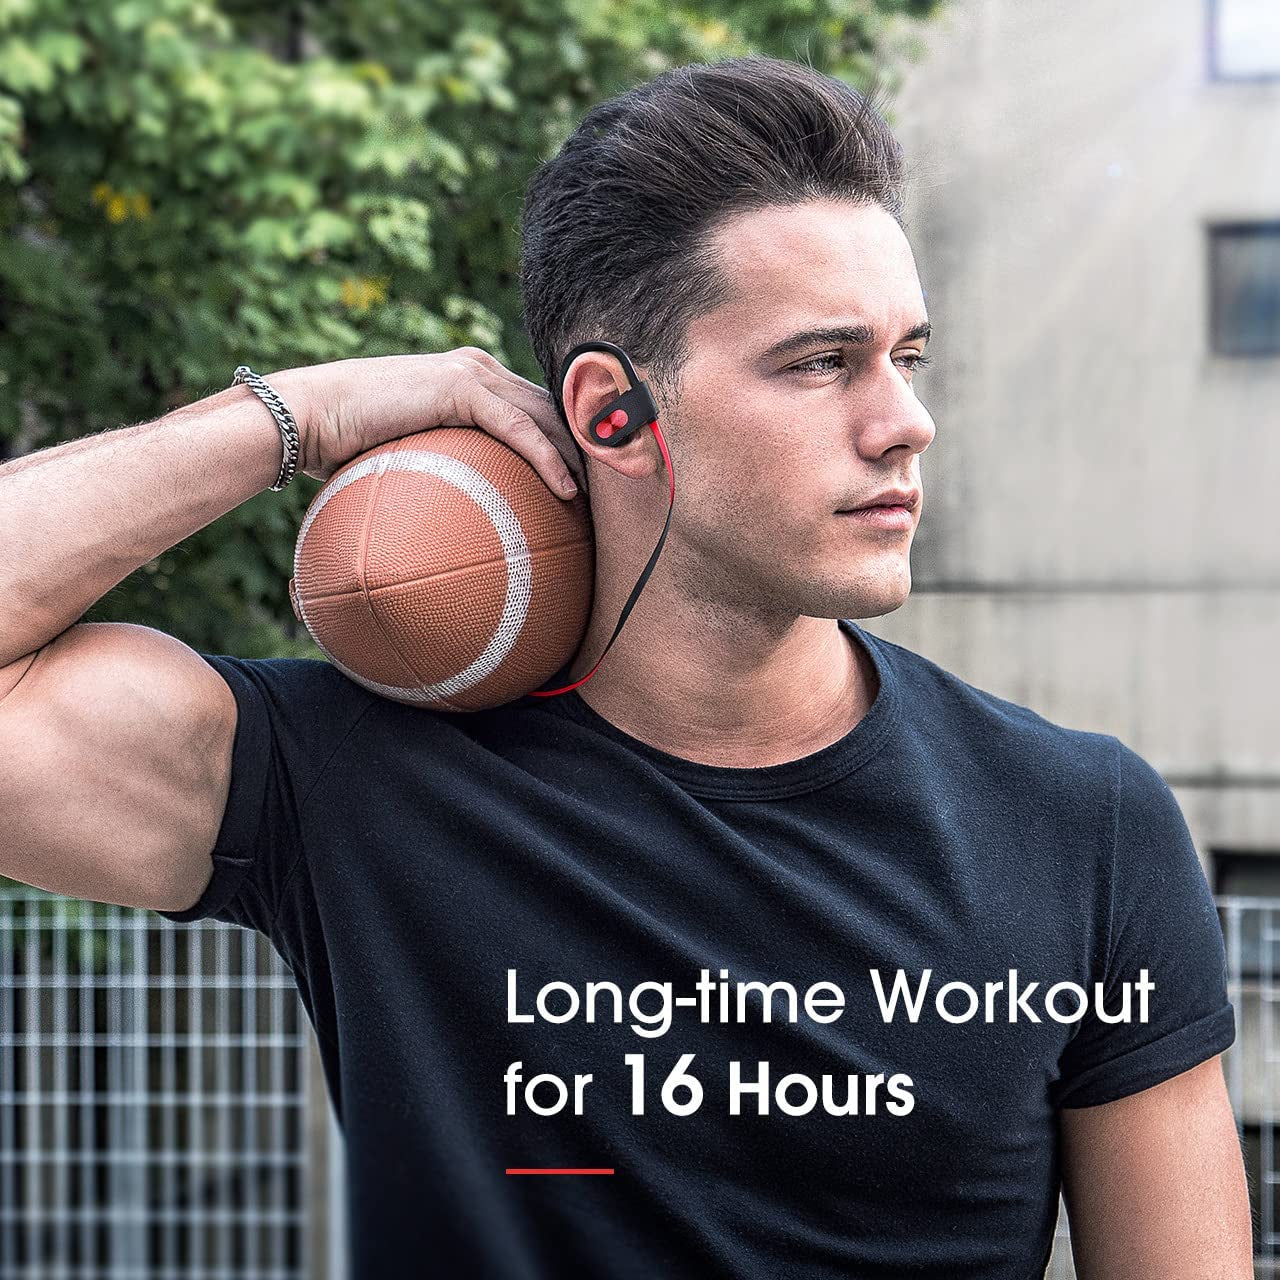 Bluetooth Headphones, Running Headphones W/16 Hrs Playtime, Hi-Fi Stereo Sports Earbuds IPX7 Waterproof/Cvc6.0 Noise Cancelling Microphone Wireless Earphones, Headsets for Workout,Gym